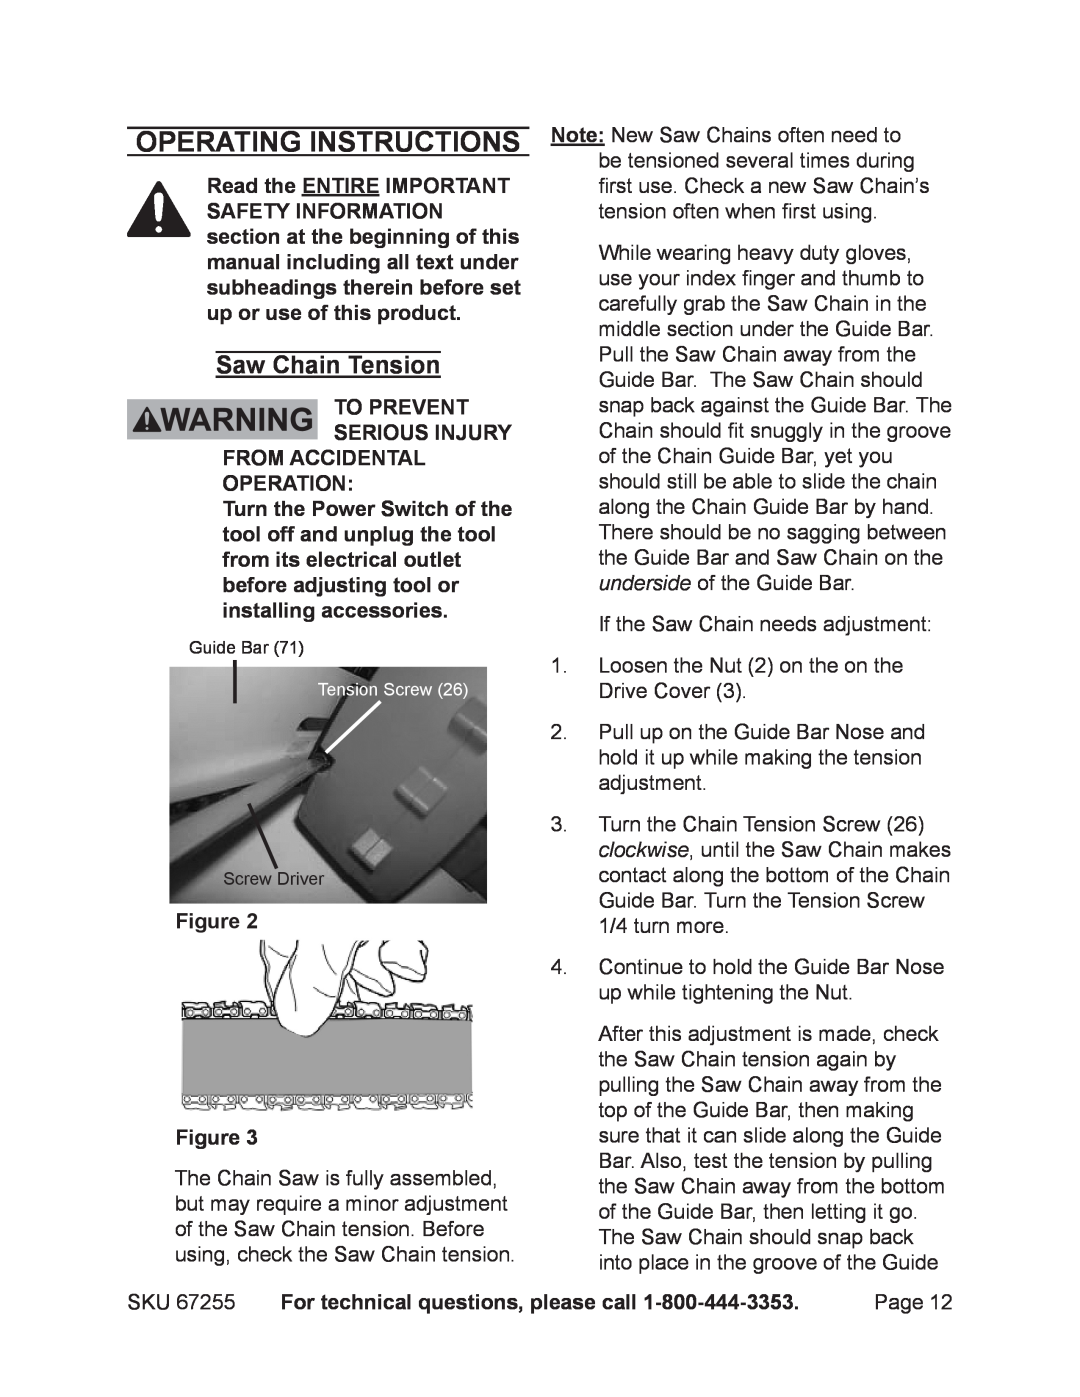 Harbor Freight Tools 67255 Operating Instructions, To prevent serious injury, from accidental operation, Figure Figure 